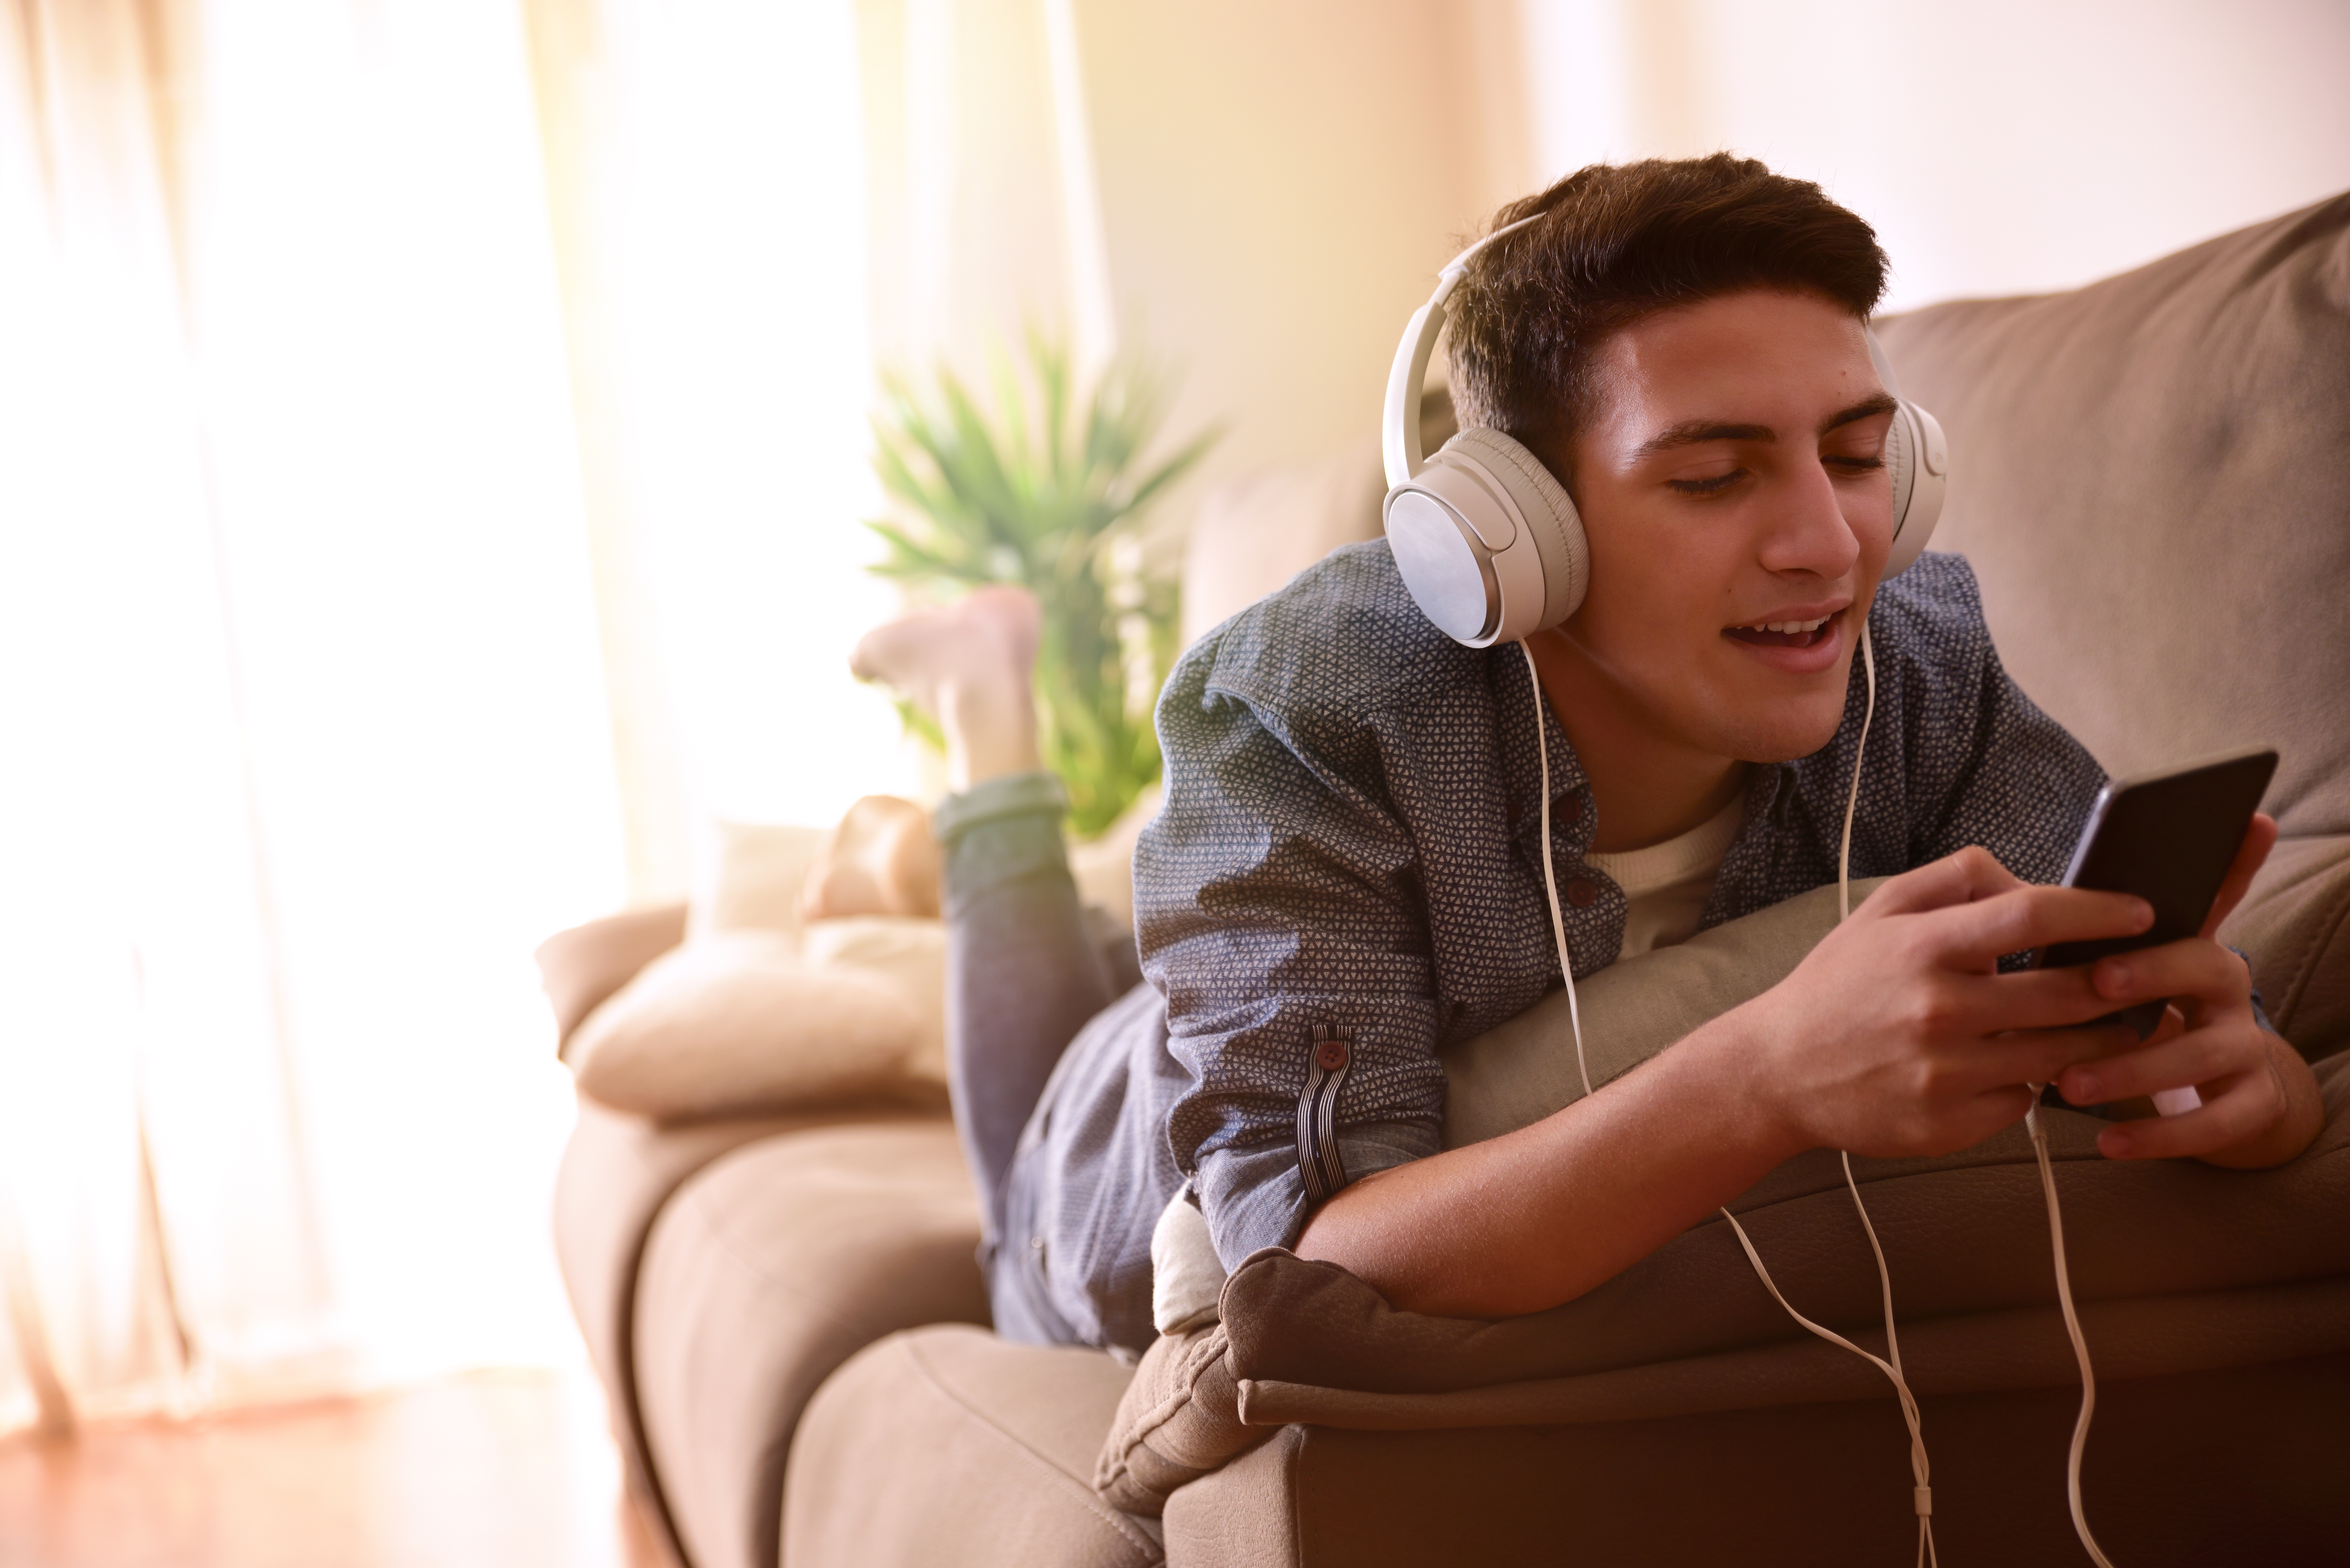 Young man with headphones on laying on the couch listening to music